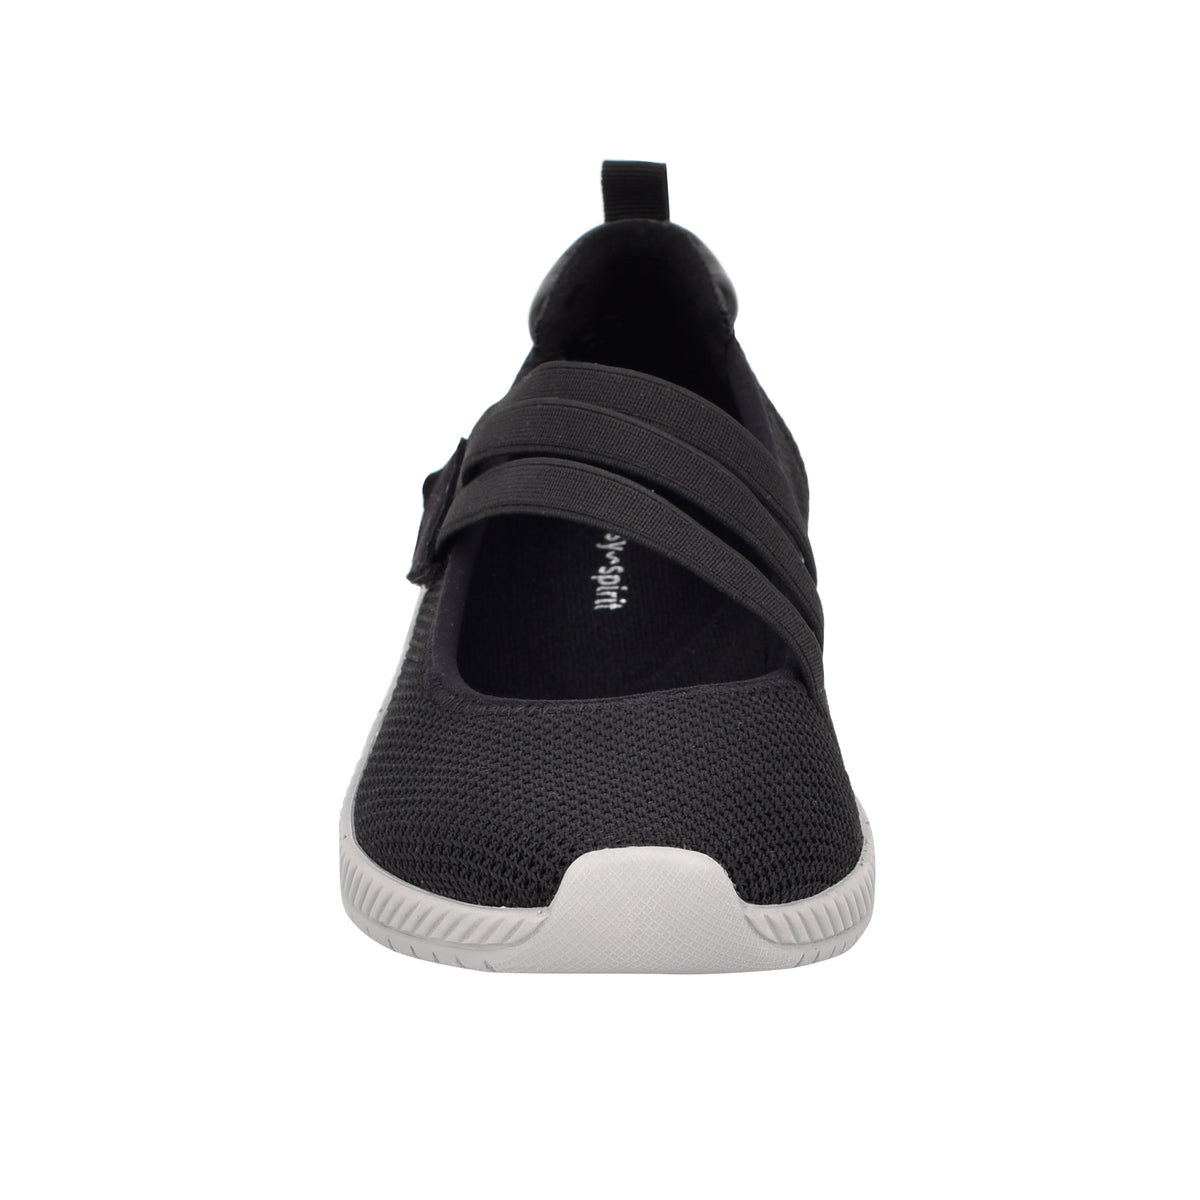 guin-mary-jane-walking-shoes-in-black-fabric